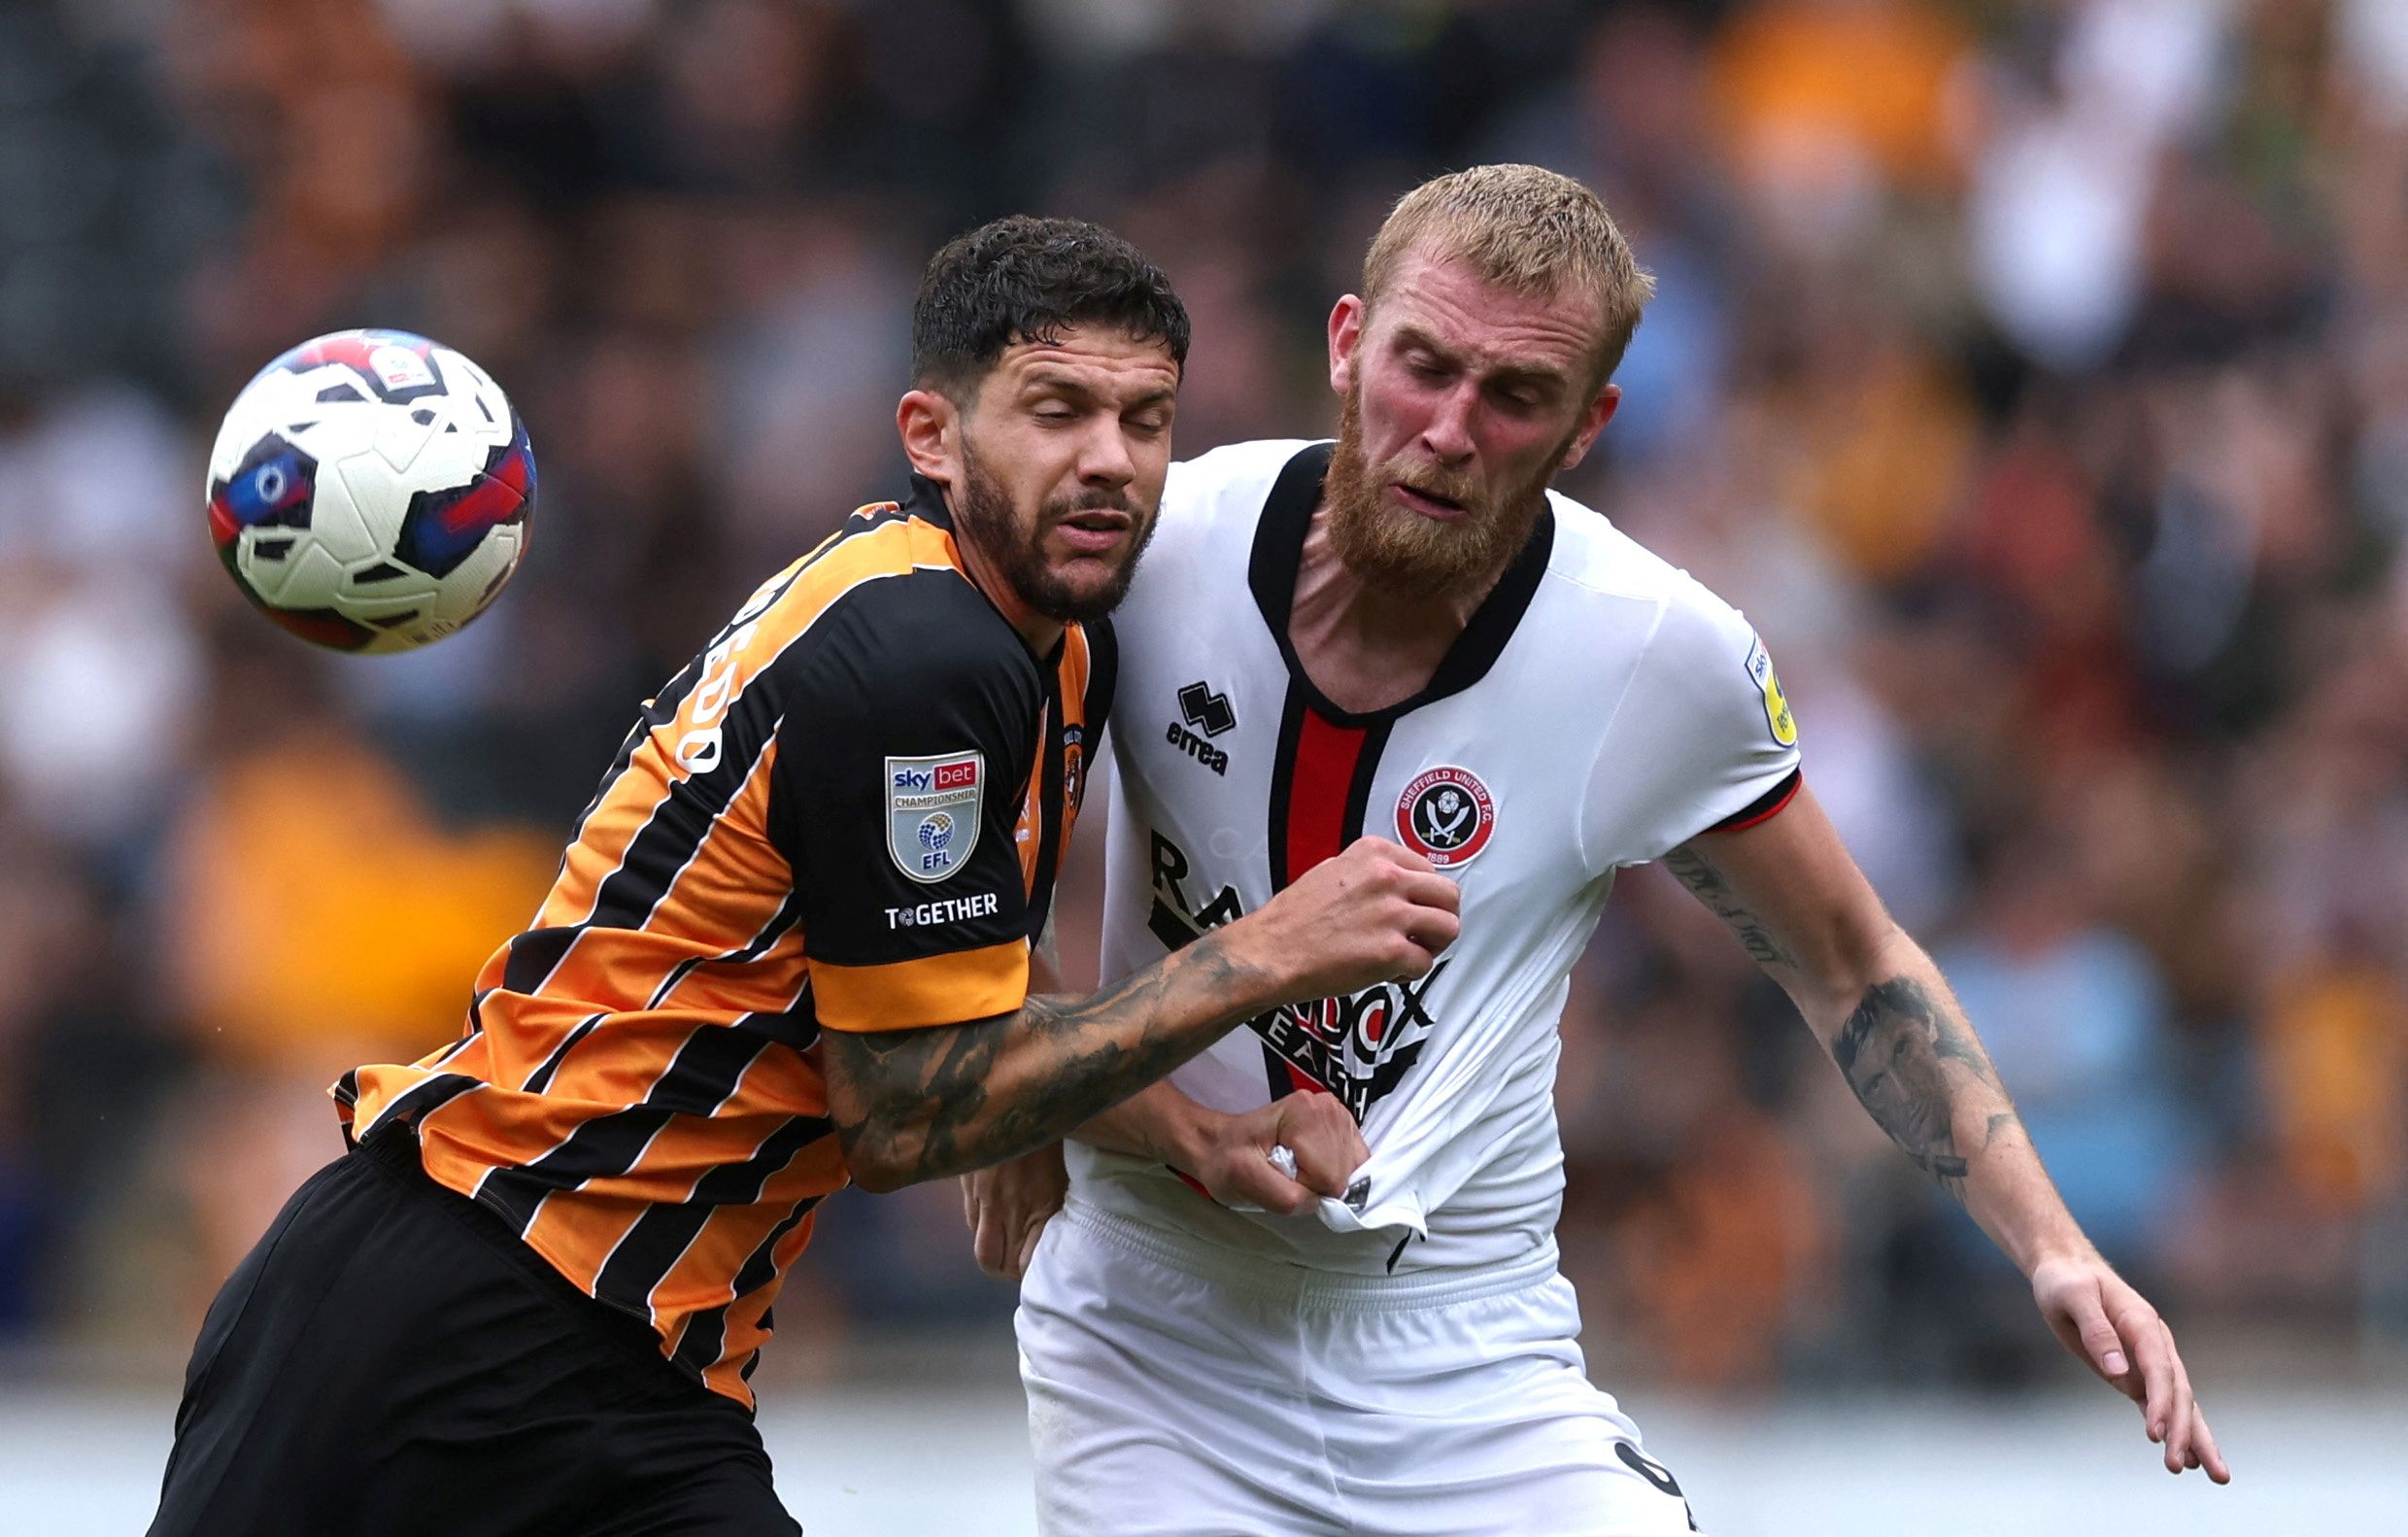 Soccer Football - Championship - Hull City v Sheffield United - MKM Stadium, Hull, Britain - September 4, 2022  Sheffield United's Oliver McBurnie in action with Hull City's Tobias Figueiredo   Action Images/Lee Smith  EDITORIAL USE ONLY. No use with unauthorized audio, video, data, fixture lists, club/league logos or 